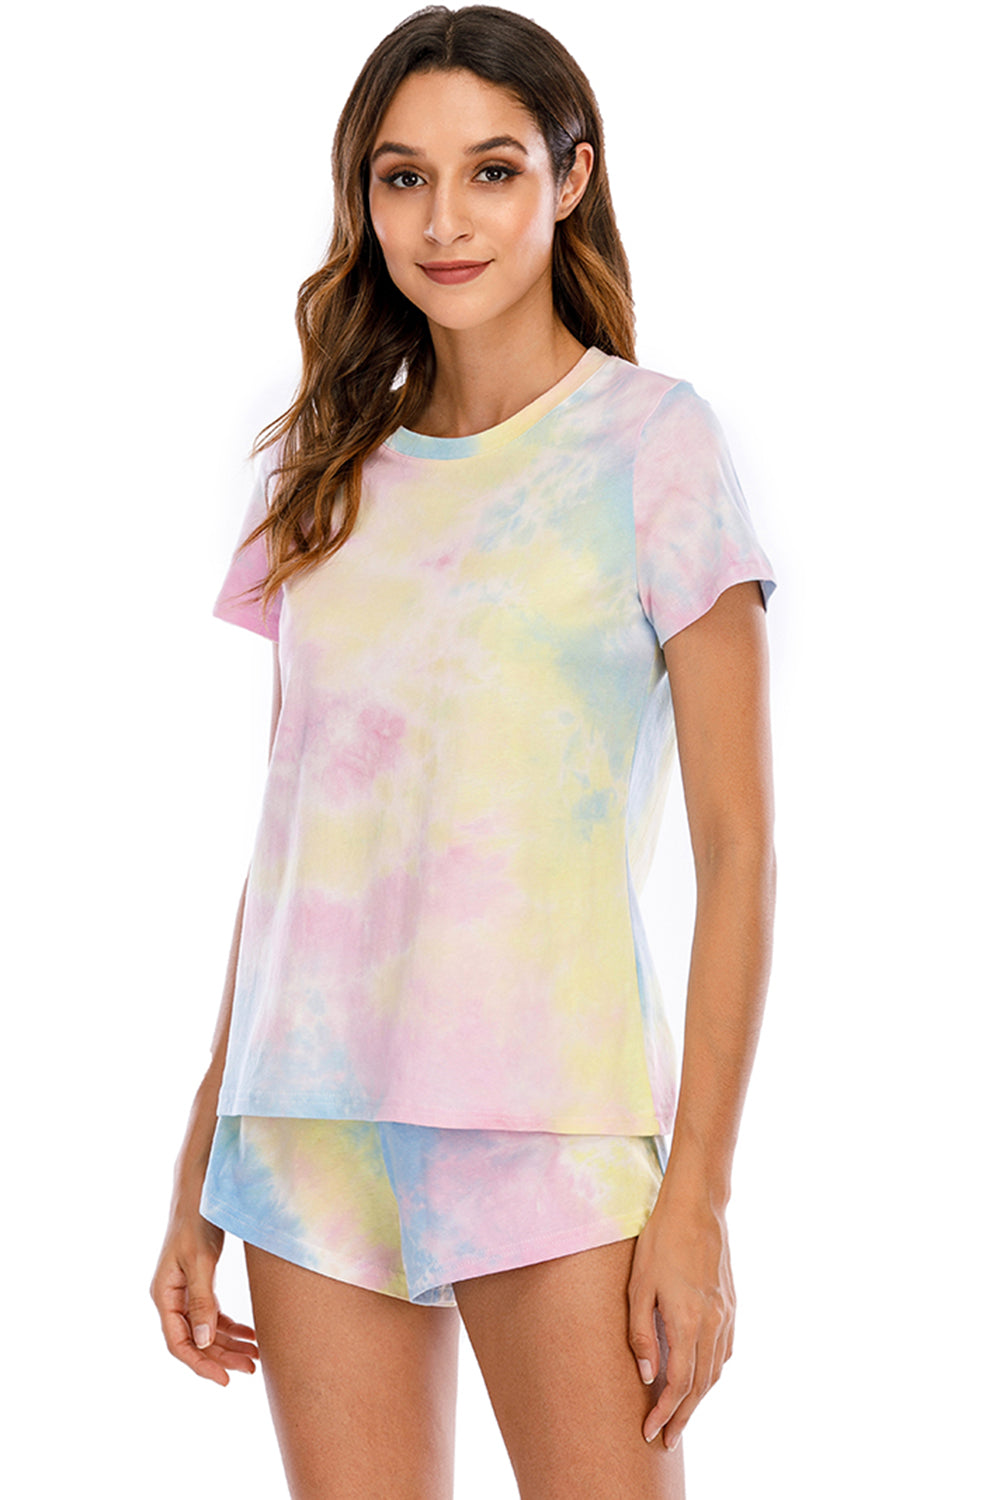 [H#Y] Tie-Dye Round Neck Short Sleeve Top and Shorts Lounge Set